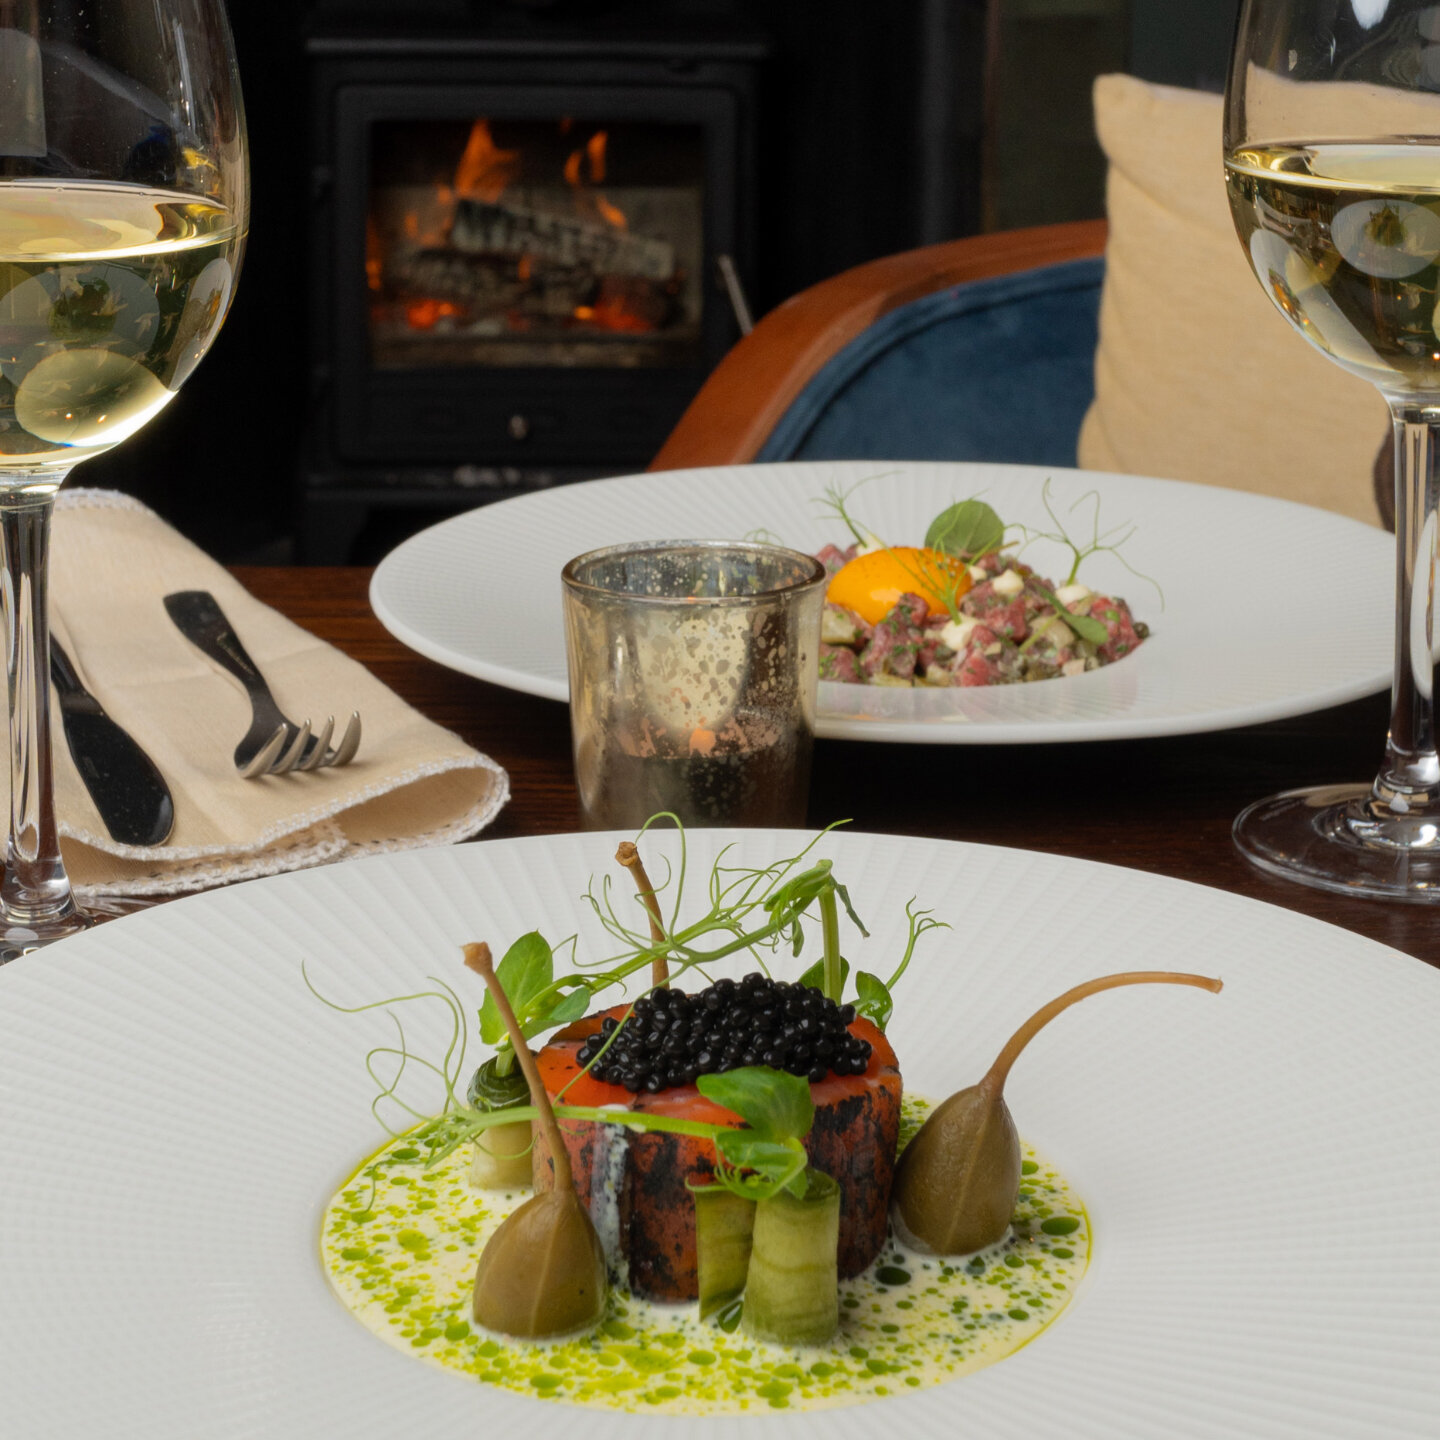 🍸 Step into a world of romance at the Boar's Head for your next date night! 🍽️✨

So why settle for ordinary when you can have extraordinary? Book your table now and let the magic unfold!

#scottishfoodie #fifefoodie #fifefoodscene #fifefood #theboa